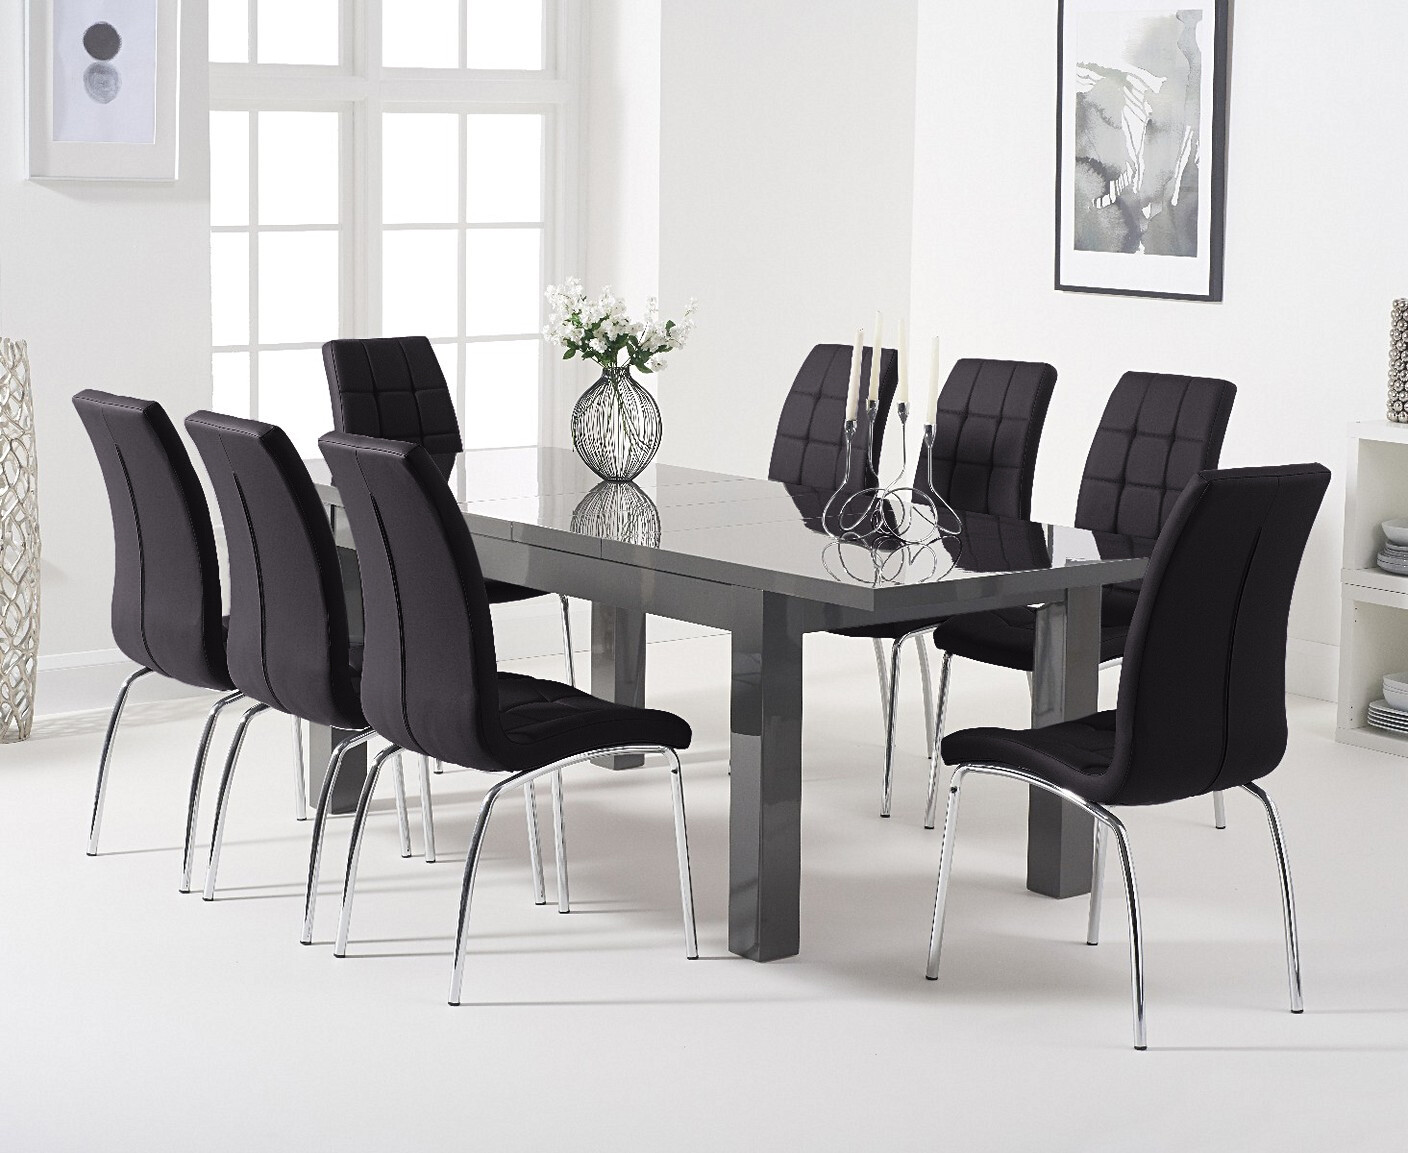 Extending Seattle 160cm Dark Grey High Gloss Dining Table With 4 White Enzo Chairs